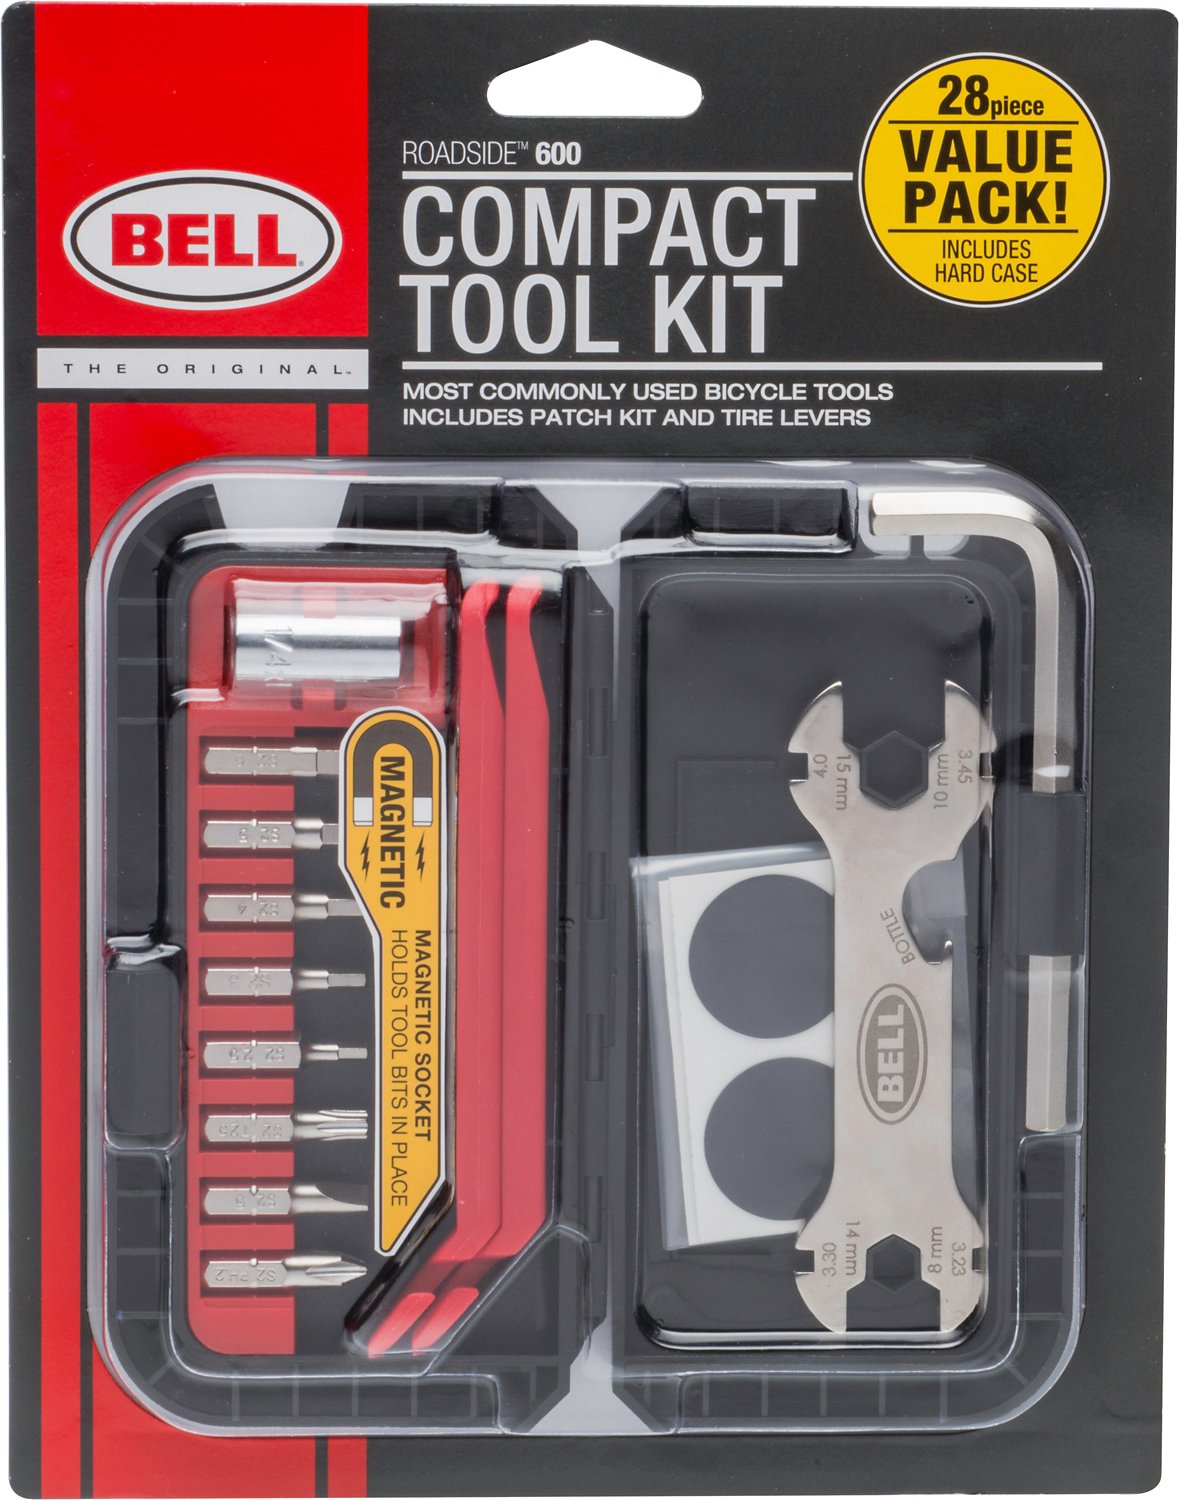 Bell Sports Roadside 600 Compact Bike 28pc Tool Kit Rugged Hard Case for sale online 